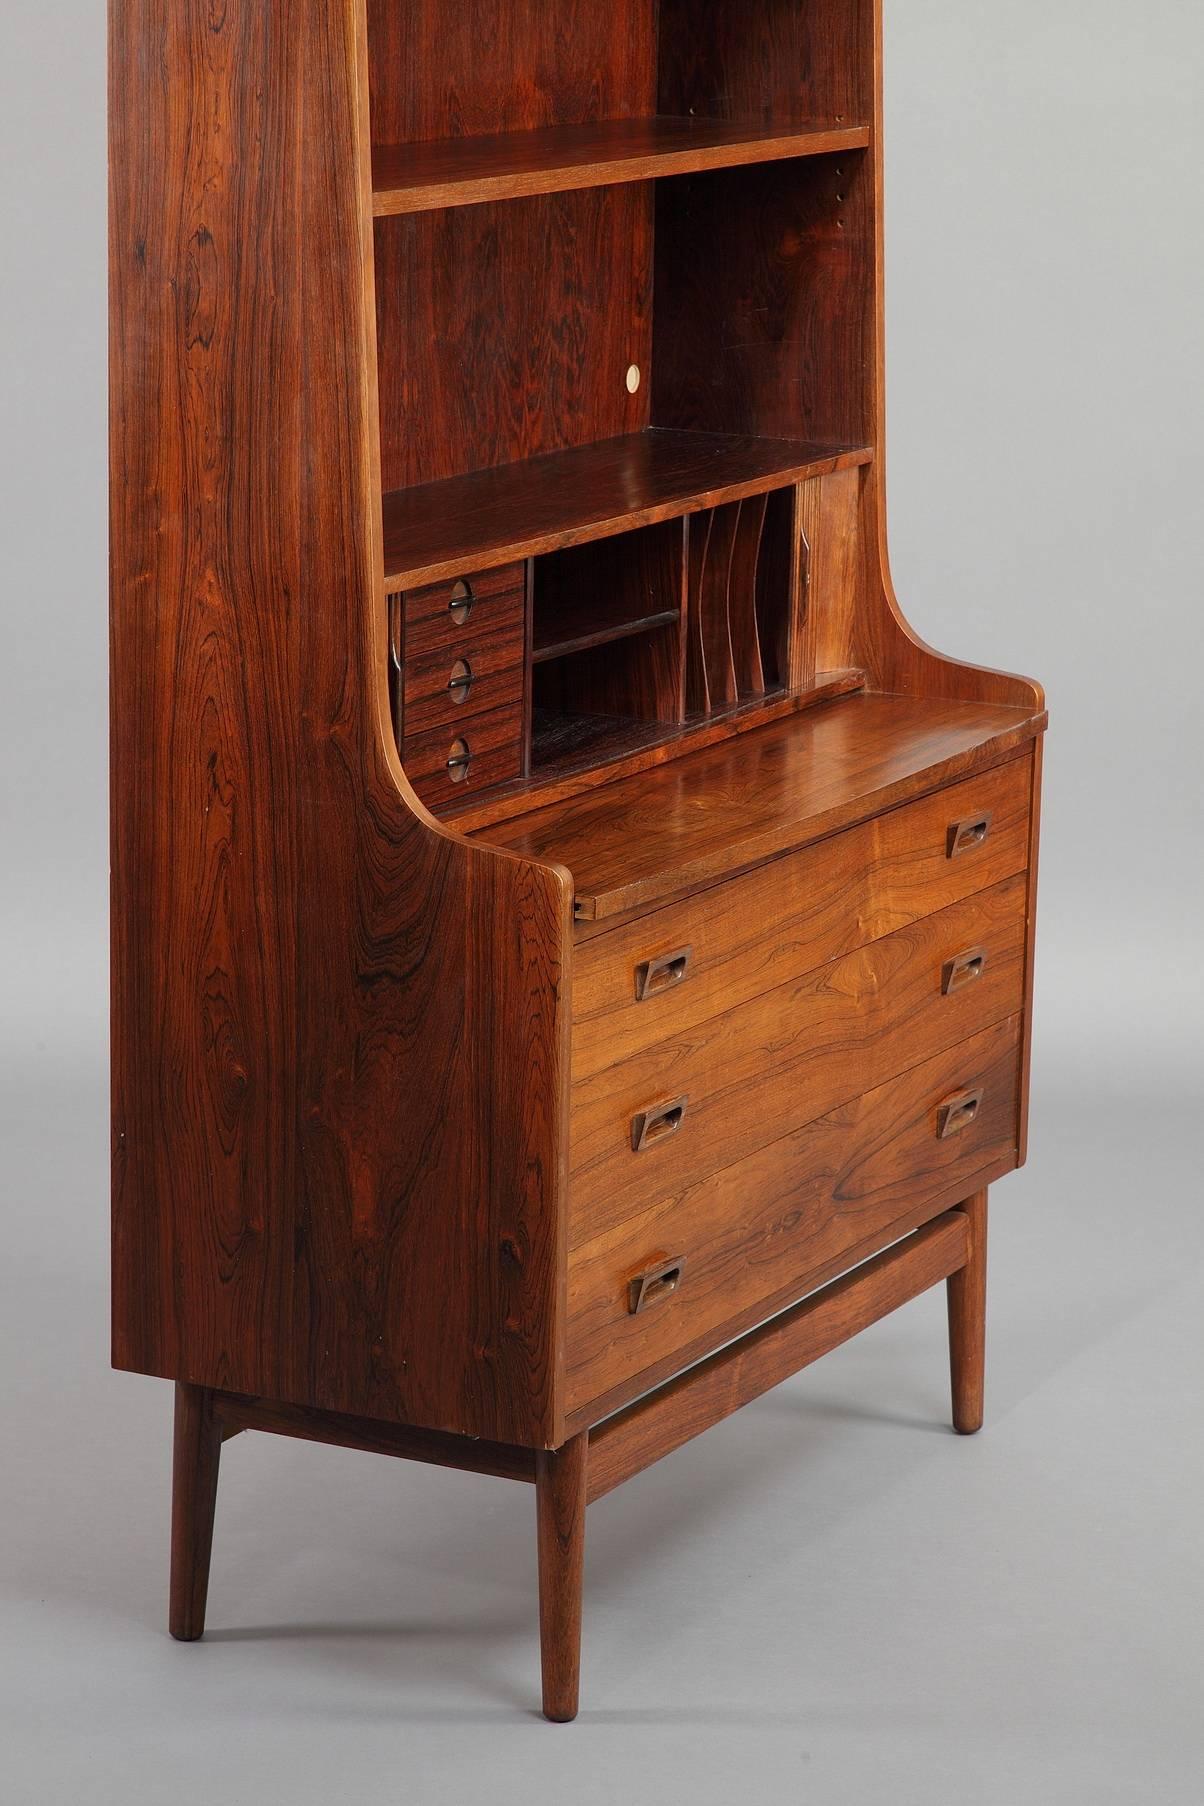 A rosewood secretaire bookcase by Johannes Sorth with adjustable upper shelves and three lower drawers. The tambour doors roll back to reveal three small drawers, mailing slots and two small cubbyholes. Manufactured by Bornholms Mobelfabrik. Good